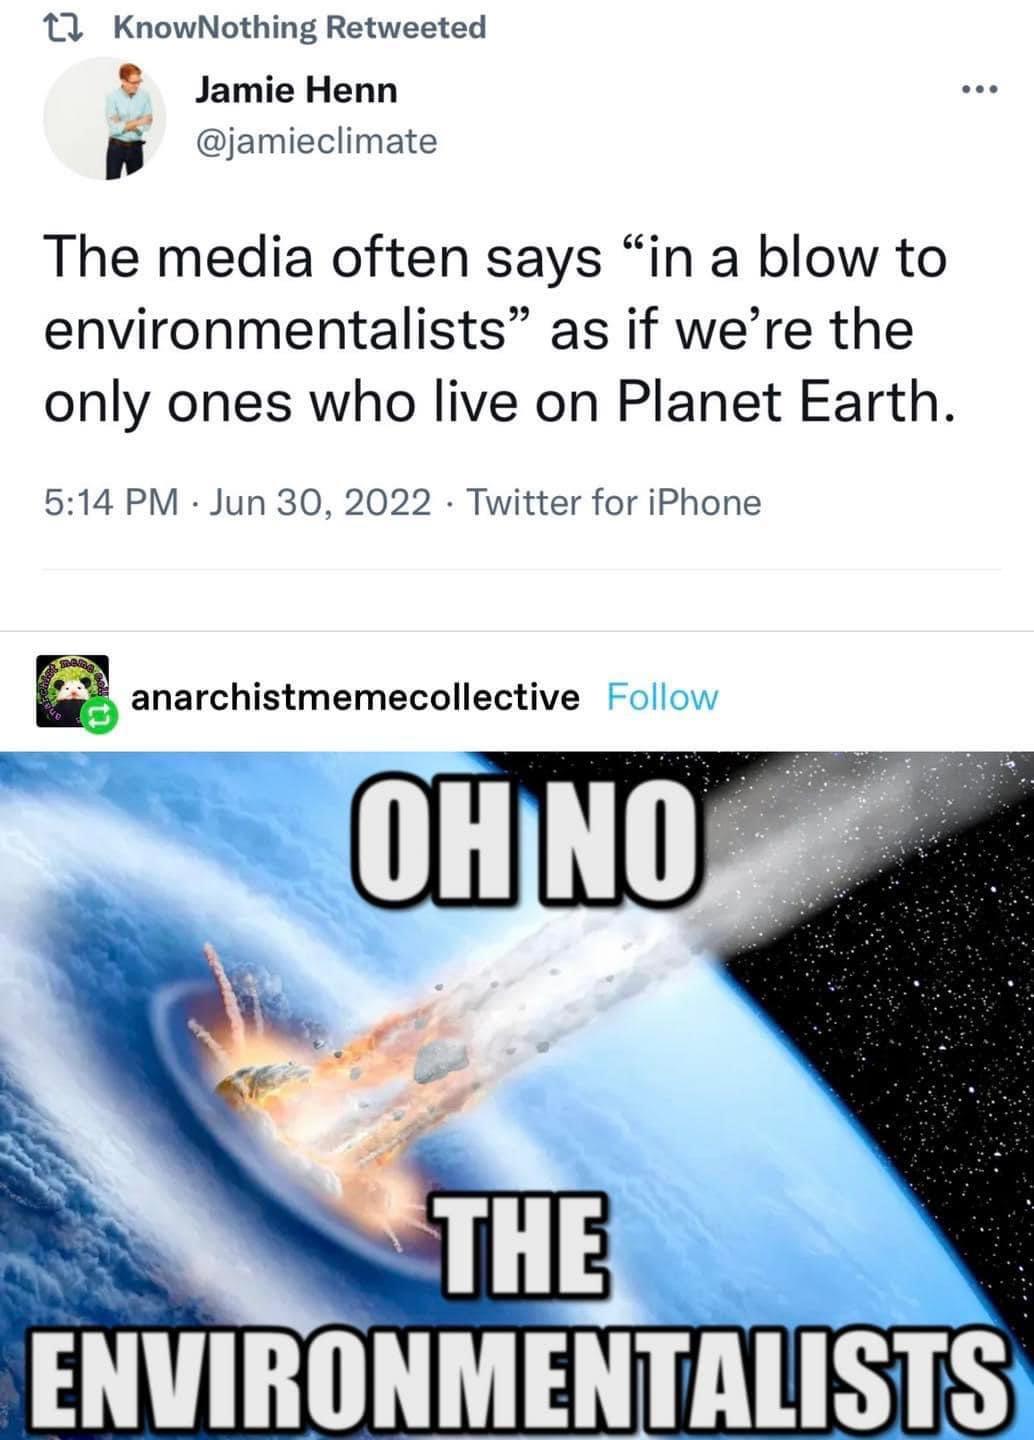 Meme about the environmentalists